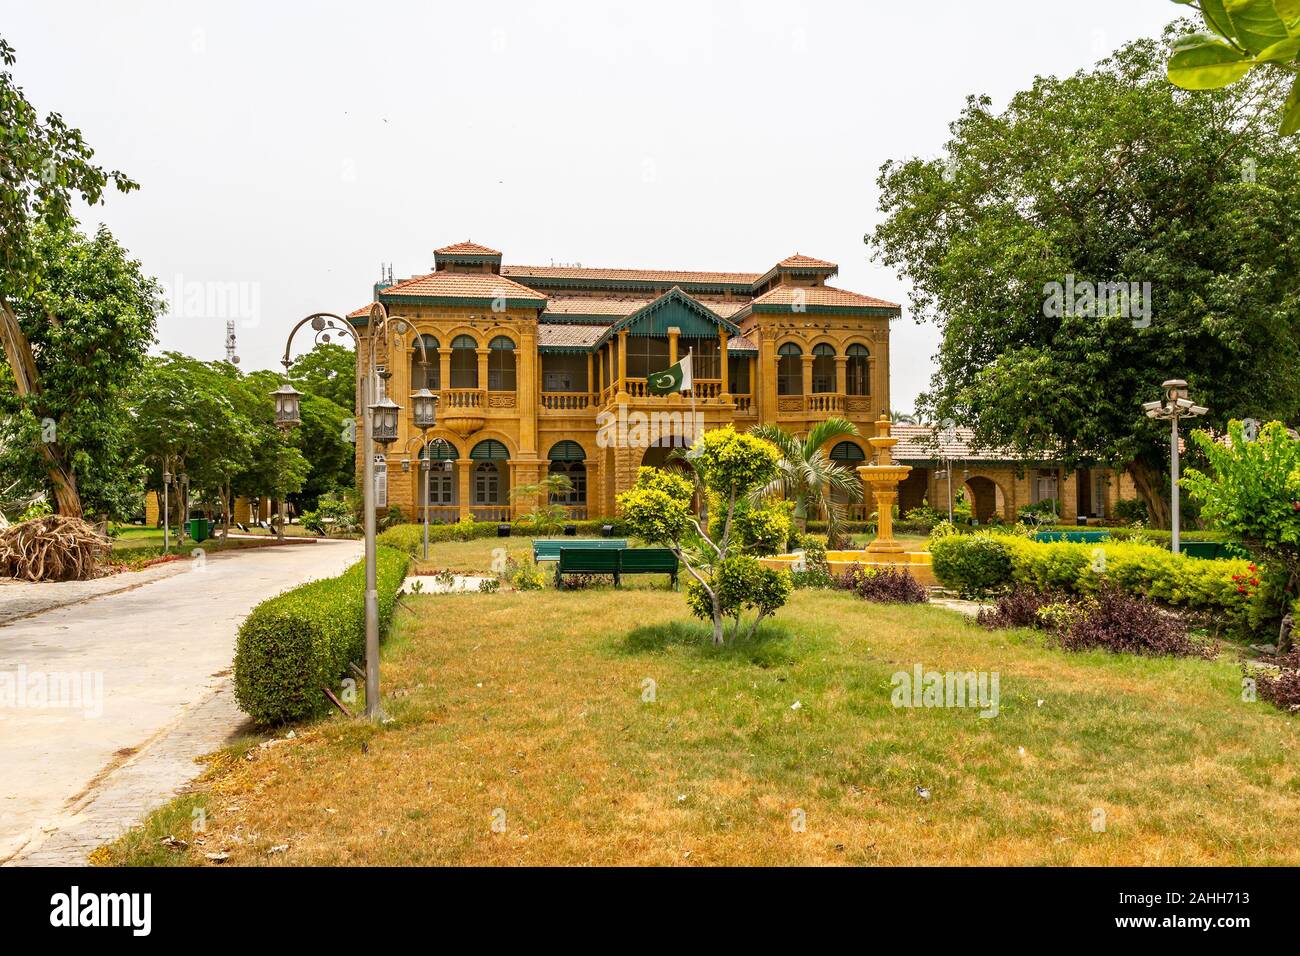 Karachi Quaid e Azam Jinnah House Museum Picturesque View with Garden and Waving Pakistan Flag on a Cloudy Day Stock Photo